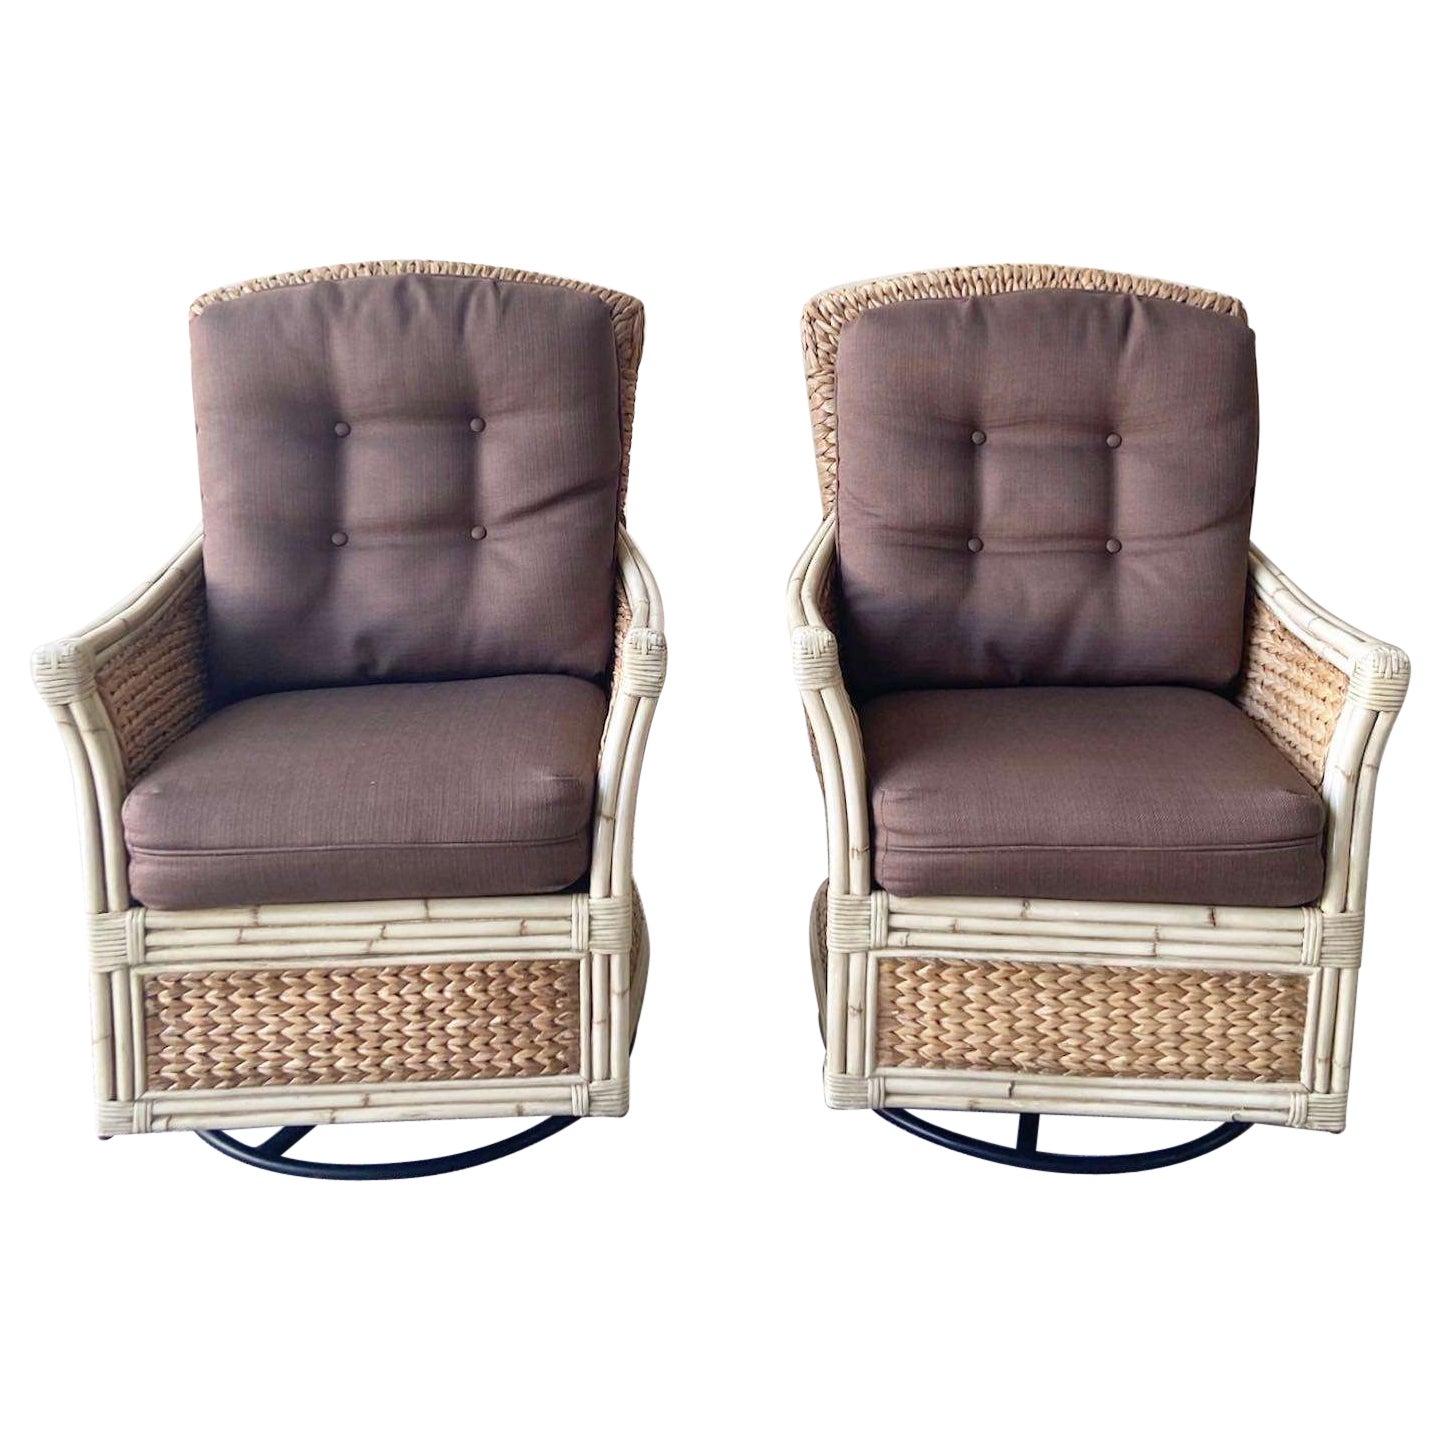 Boho Chic Bamboo Rattan and Sea Grass Rocking Swivel Chairs For Sale